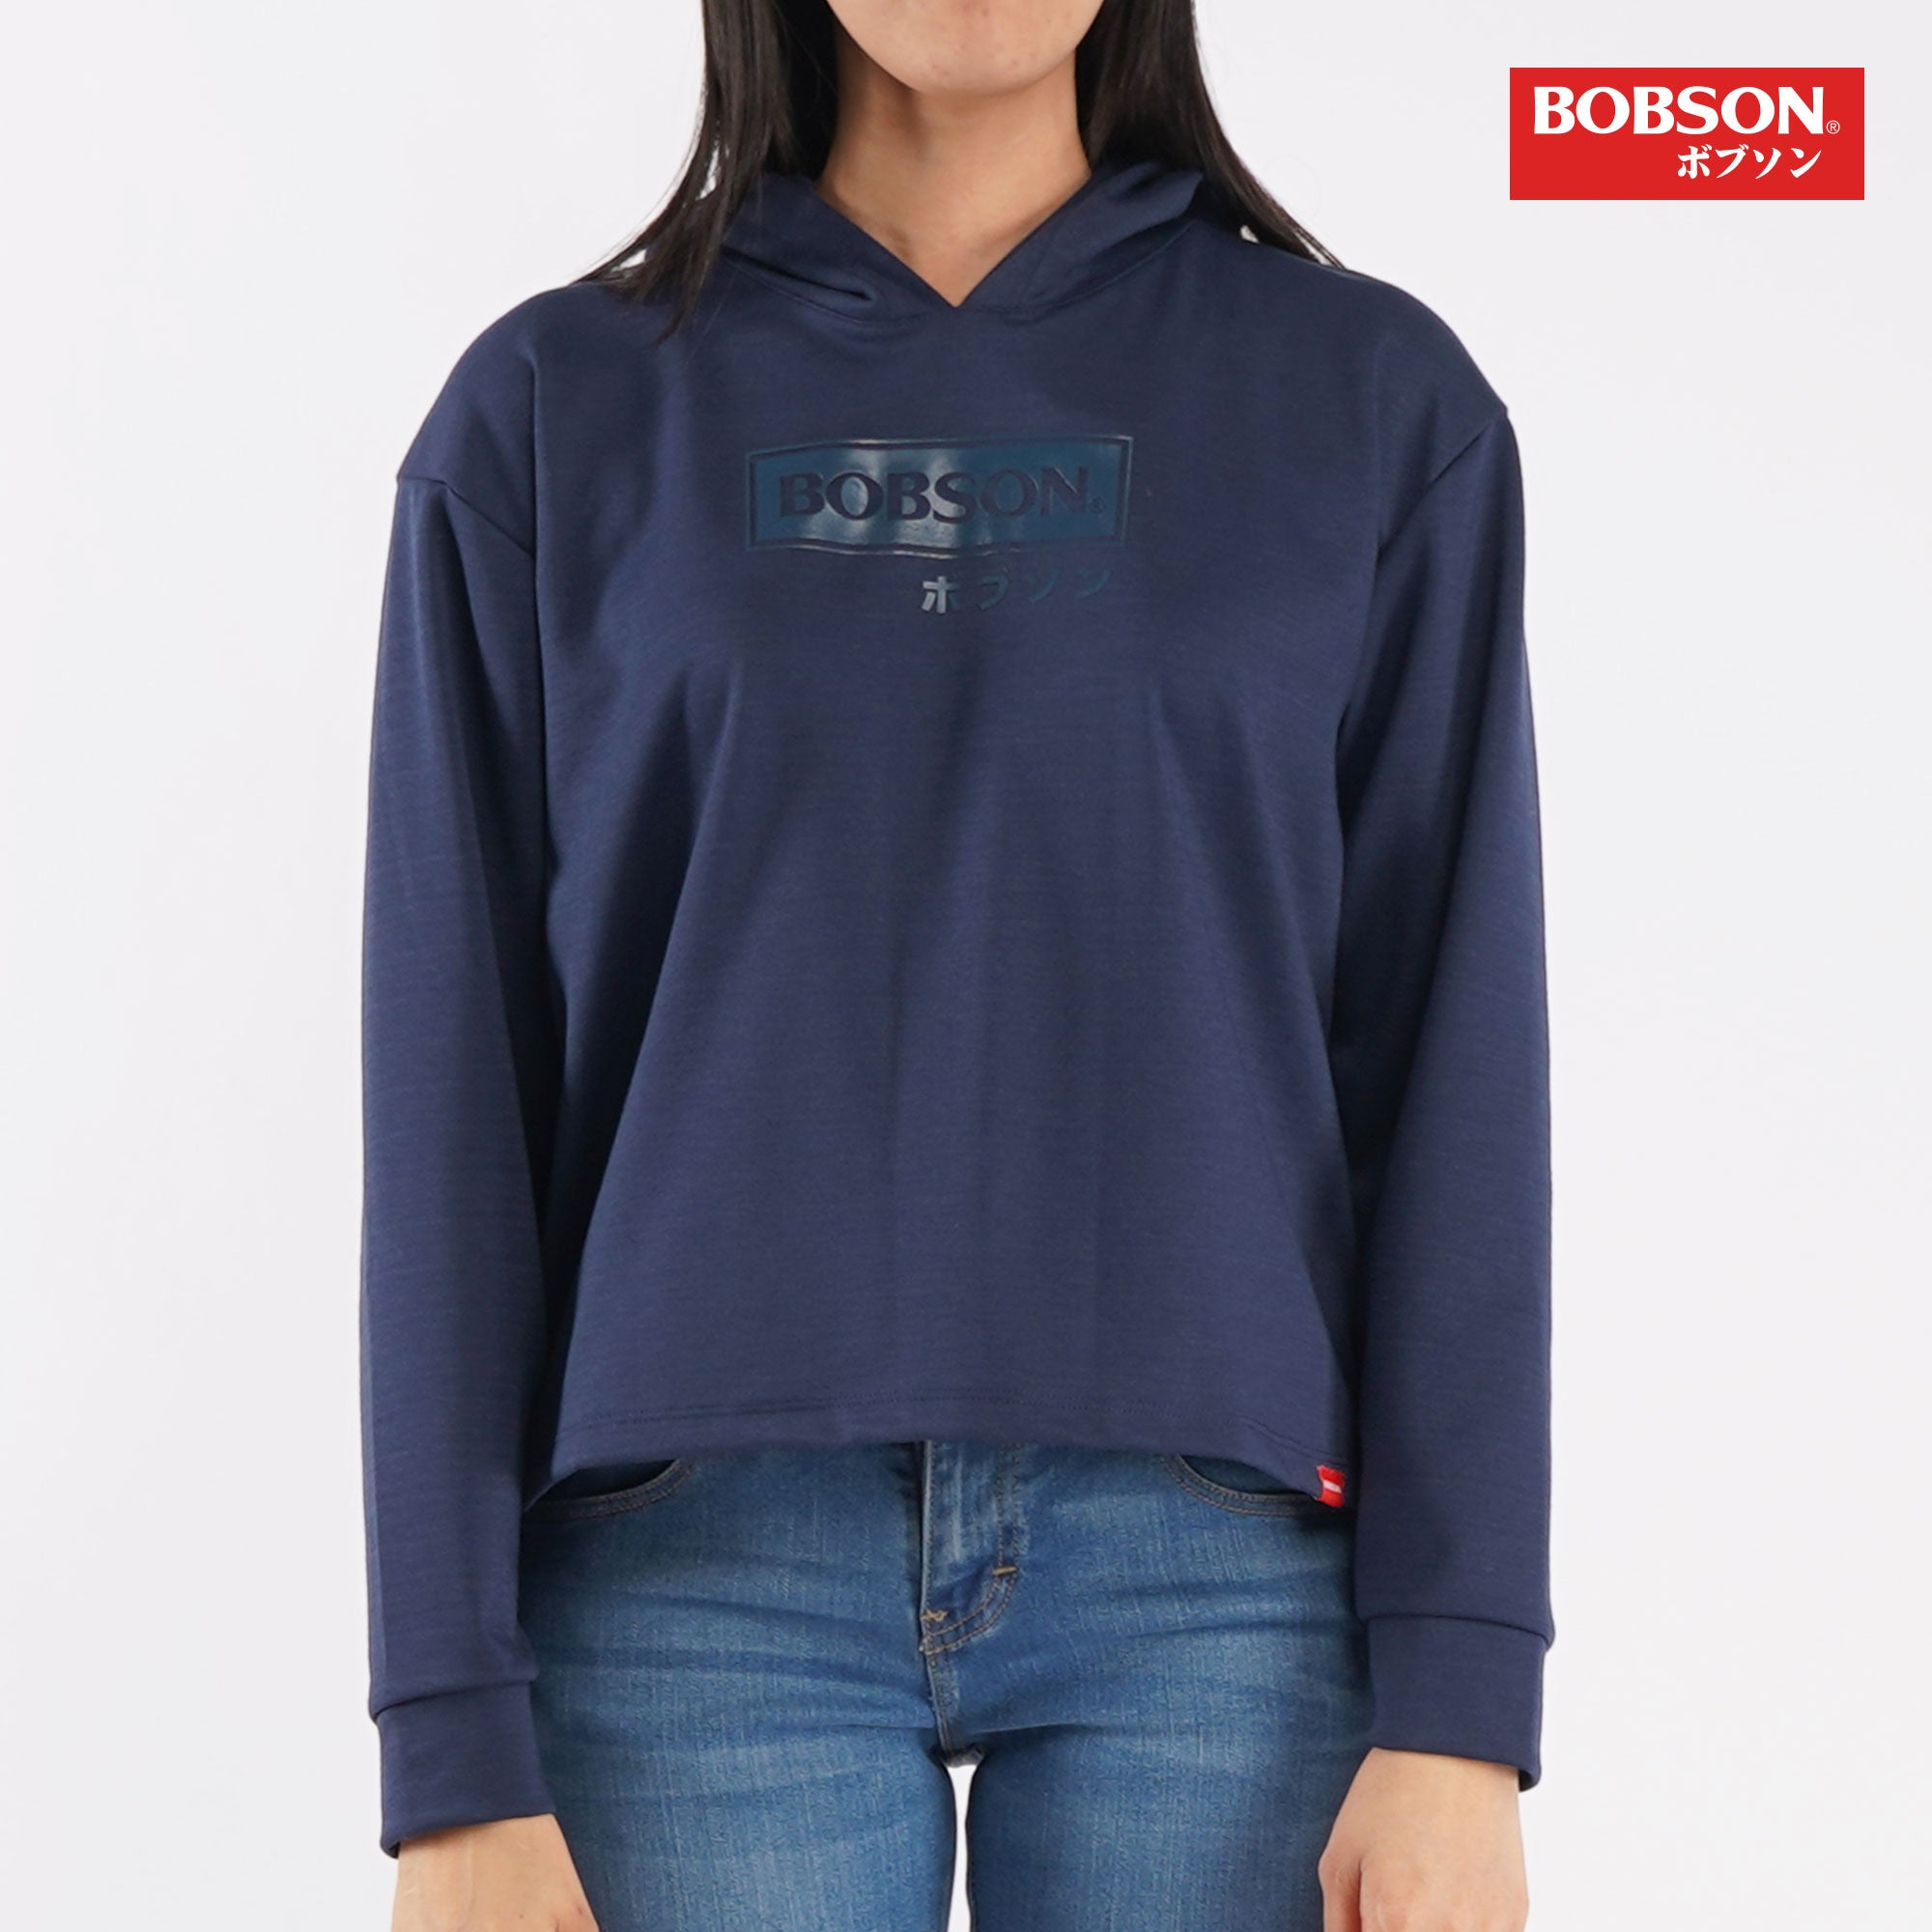 Bobson Japanese Ladies Basic Hoodie Pullover Long sleeves Crop Jacket for Women Trendy Fashion High Quality Apparel Comfortable Casual Jacket for Women 134996 (Navy)